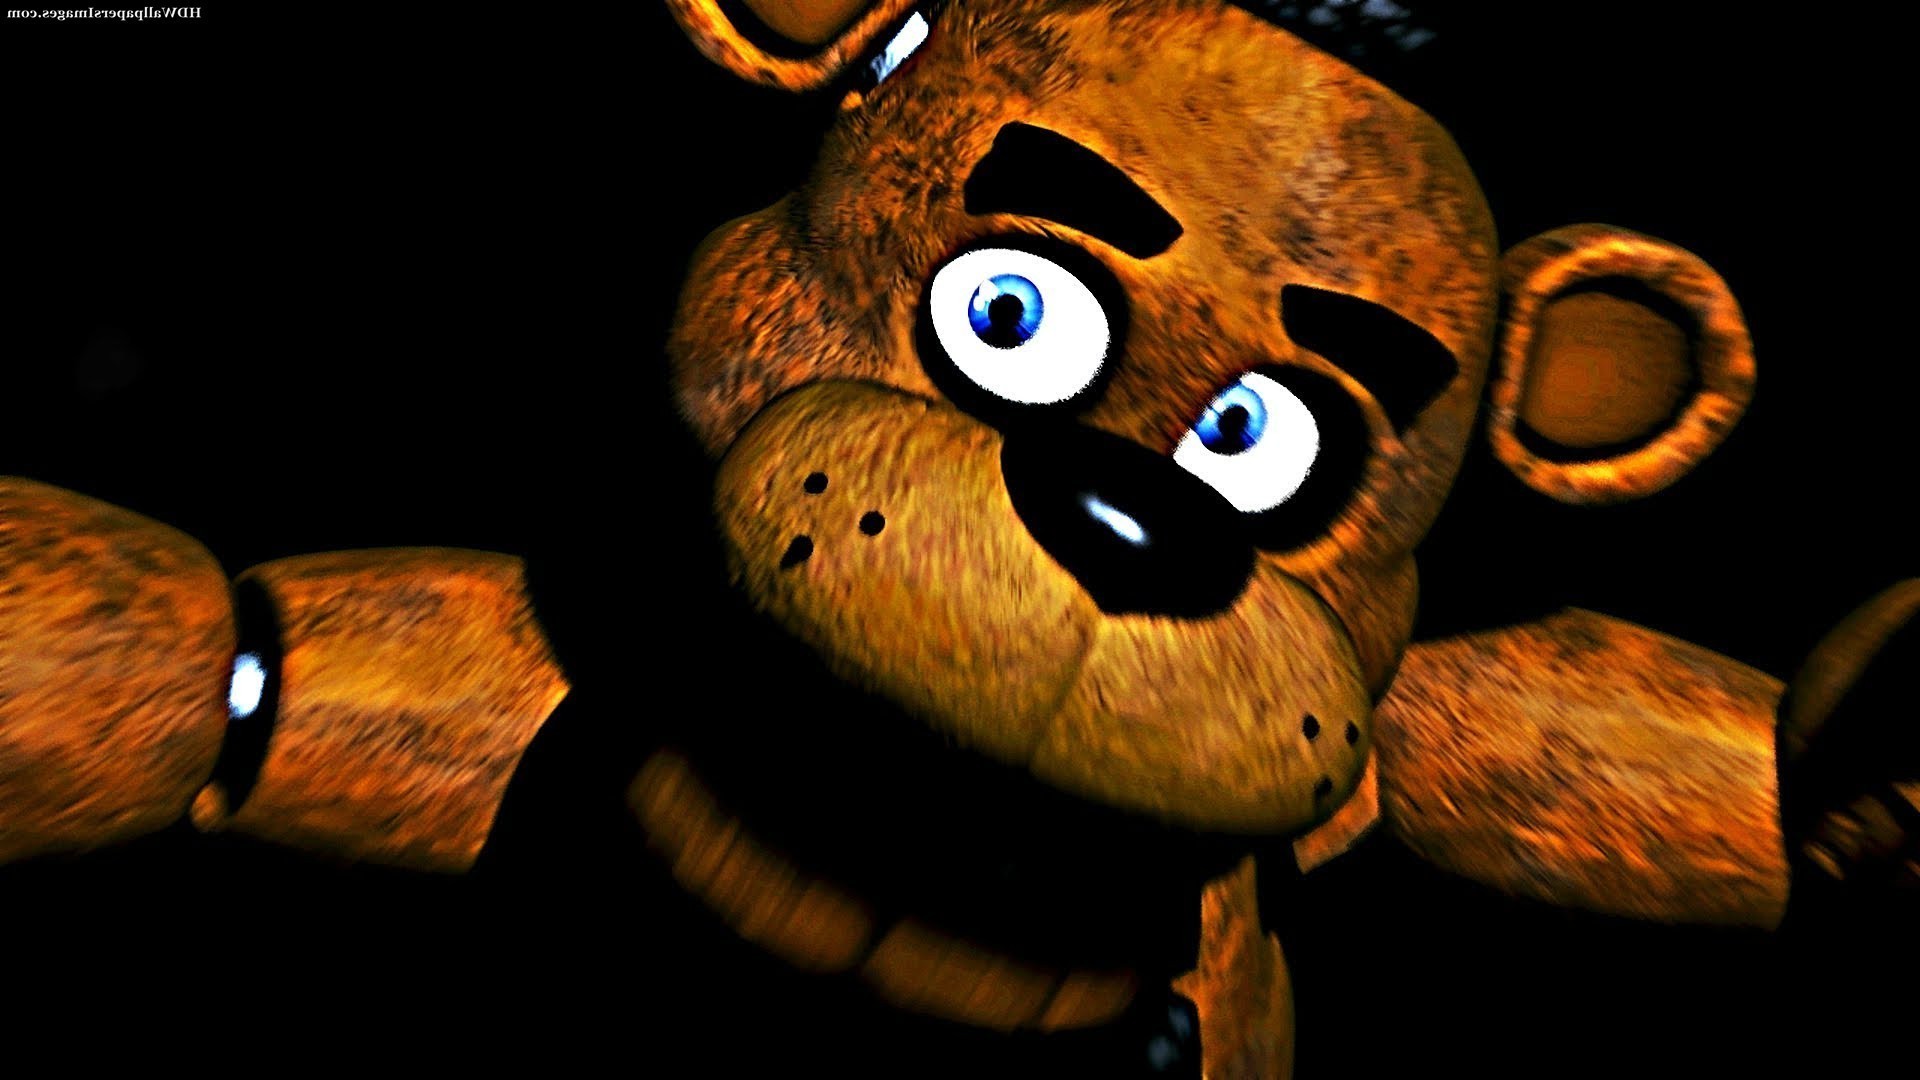 Five Nights At Freddys, Video Games, Animals, Stuffed Animals, Freddy Fazbear Wallpapers HD / Desktop and Mobile Backgrounds